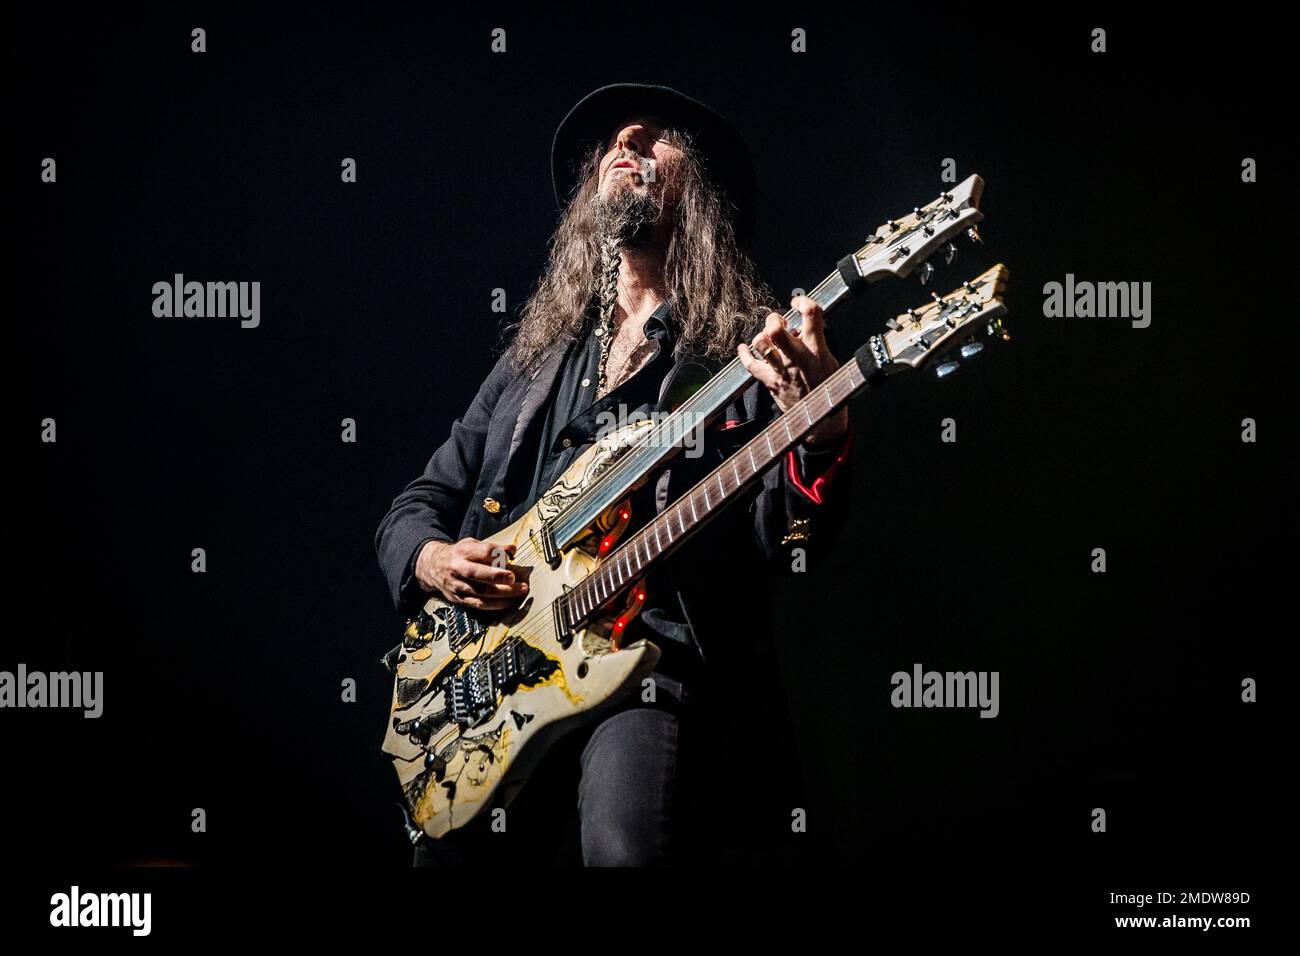 Bumblefoot playing guitar live on stage Stock Photo